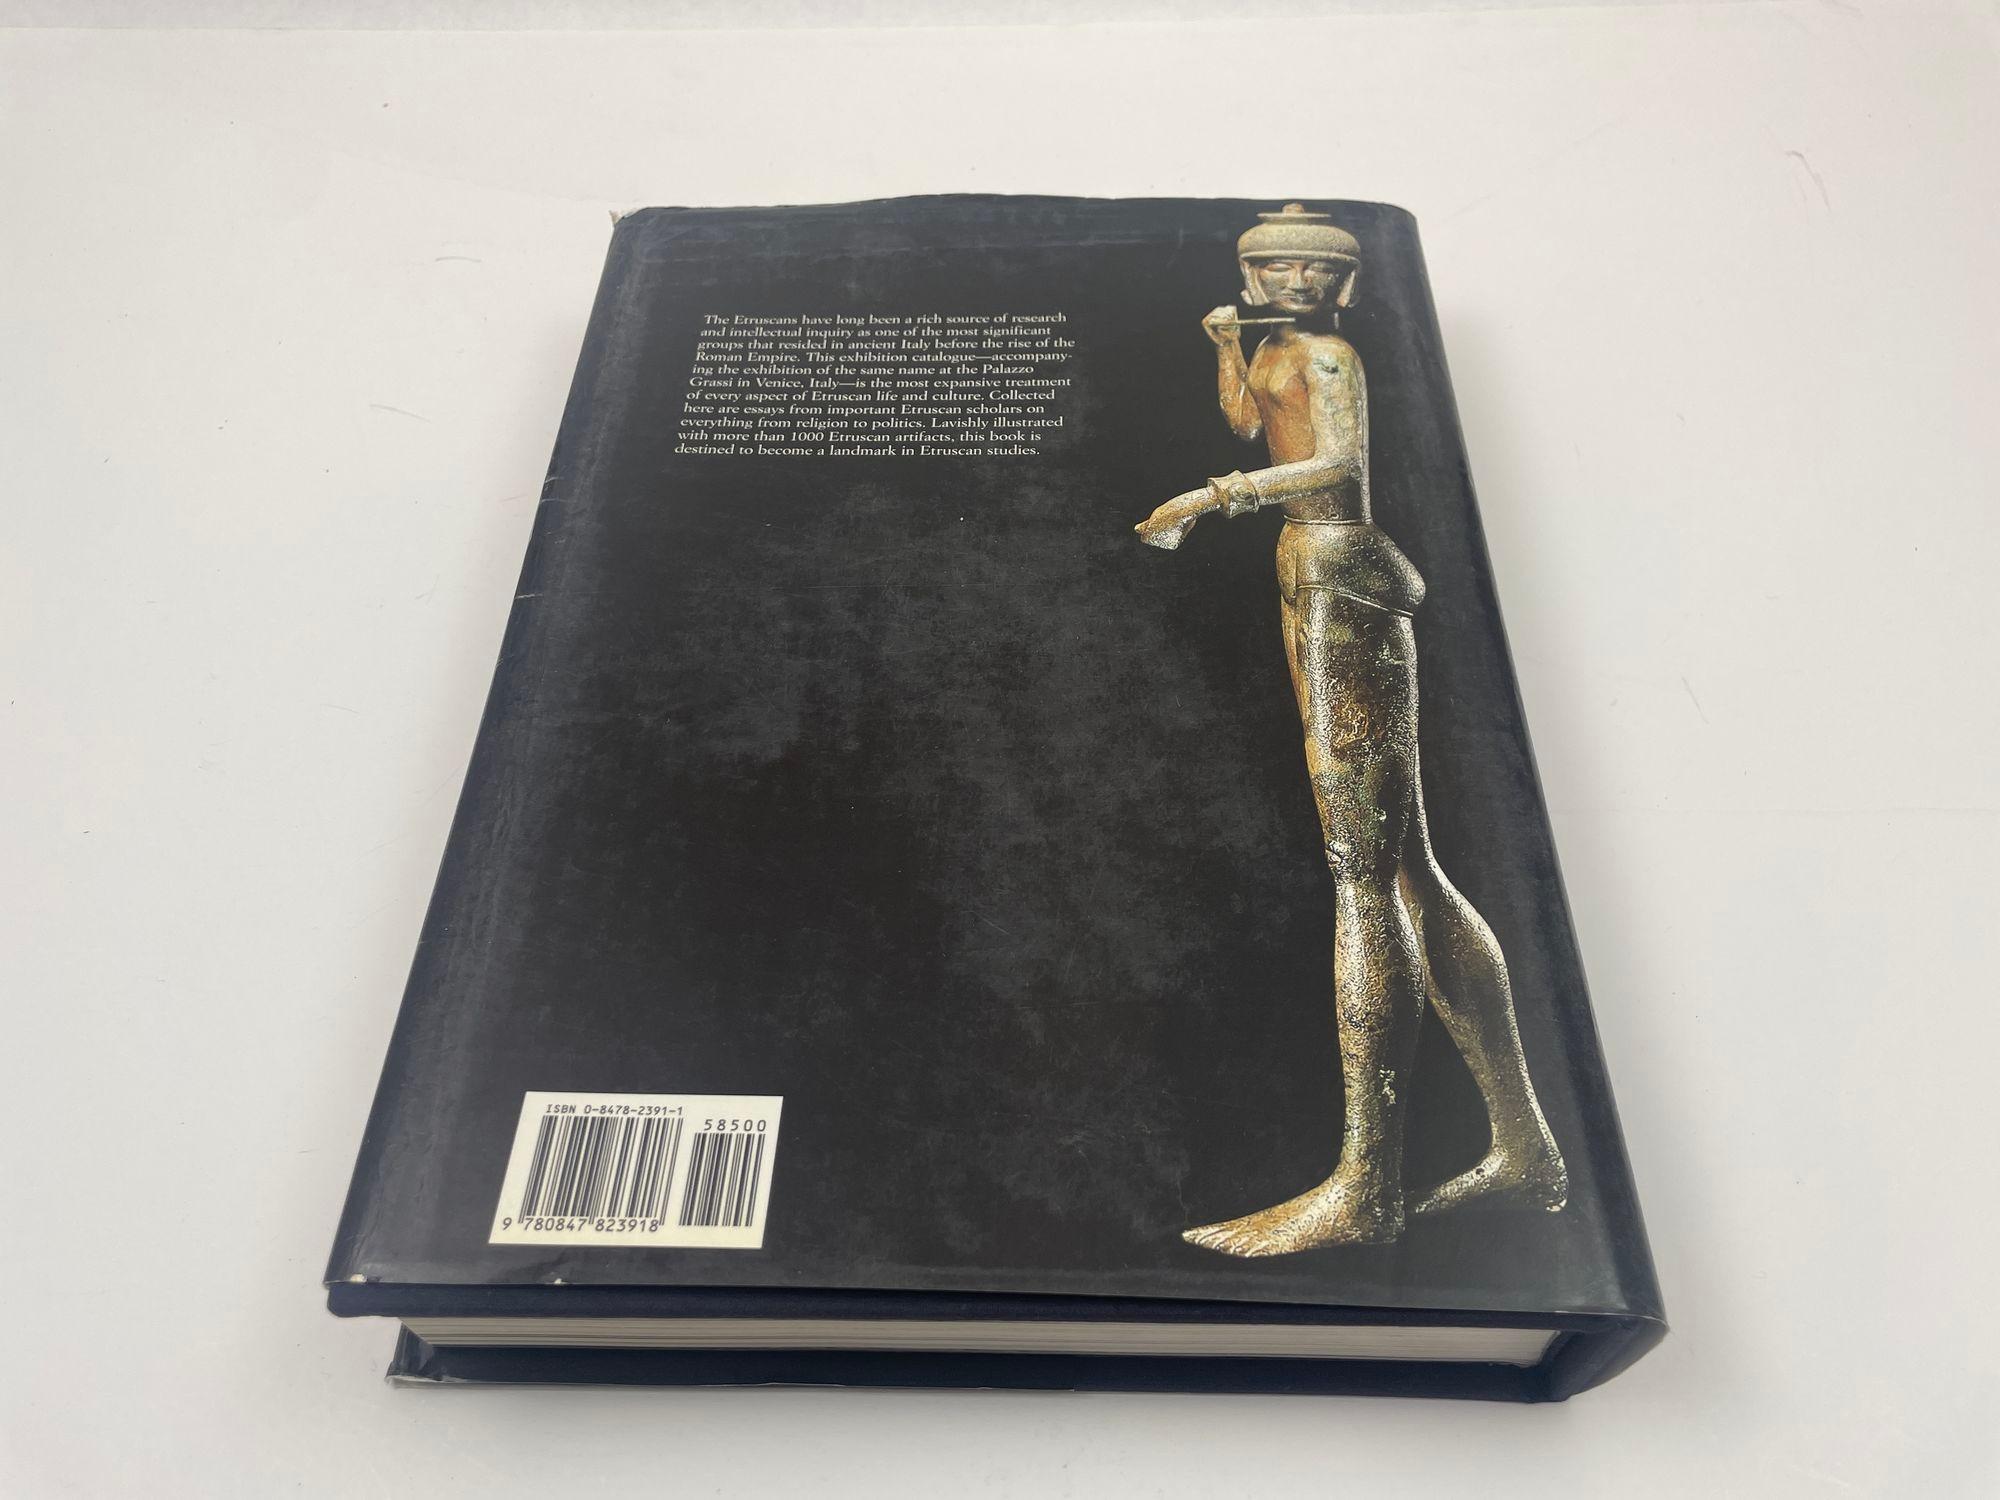 italien The Etruscans Hardcover Book by Mario Torelli 1st Ed. 2001 Rizzoli en vente